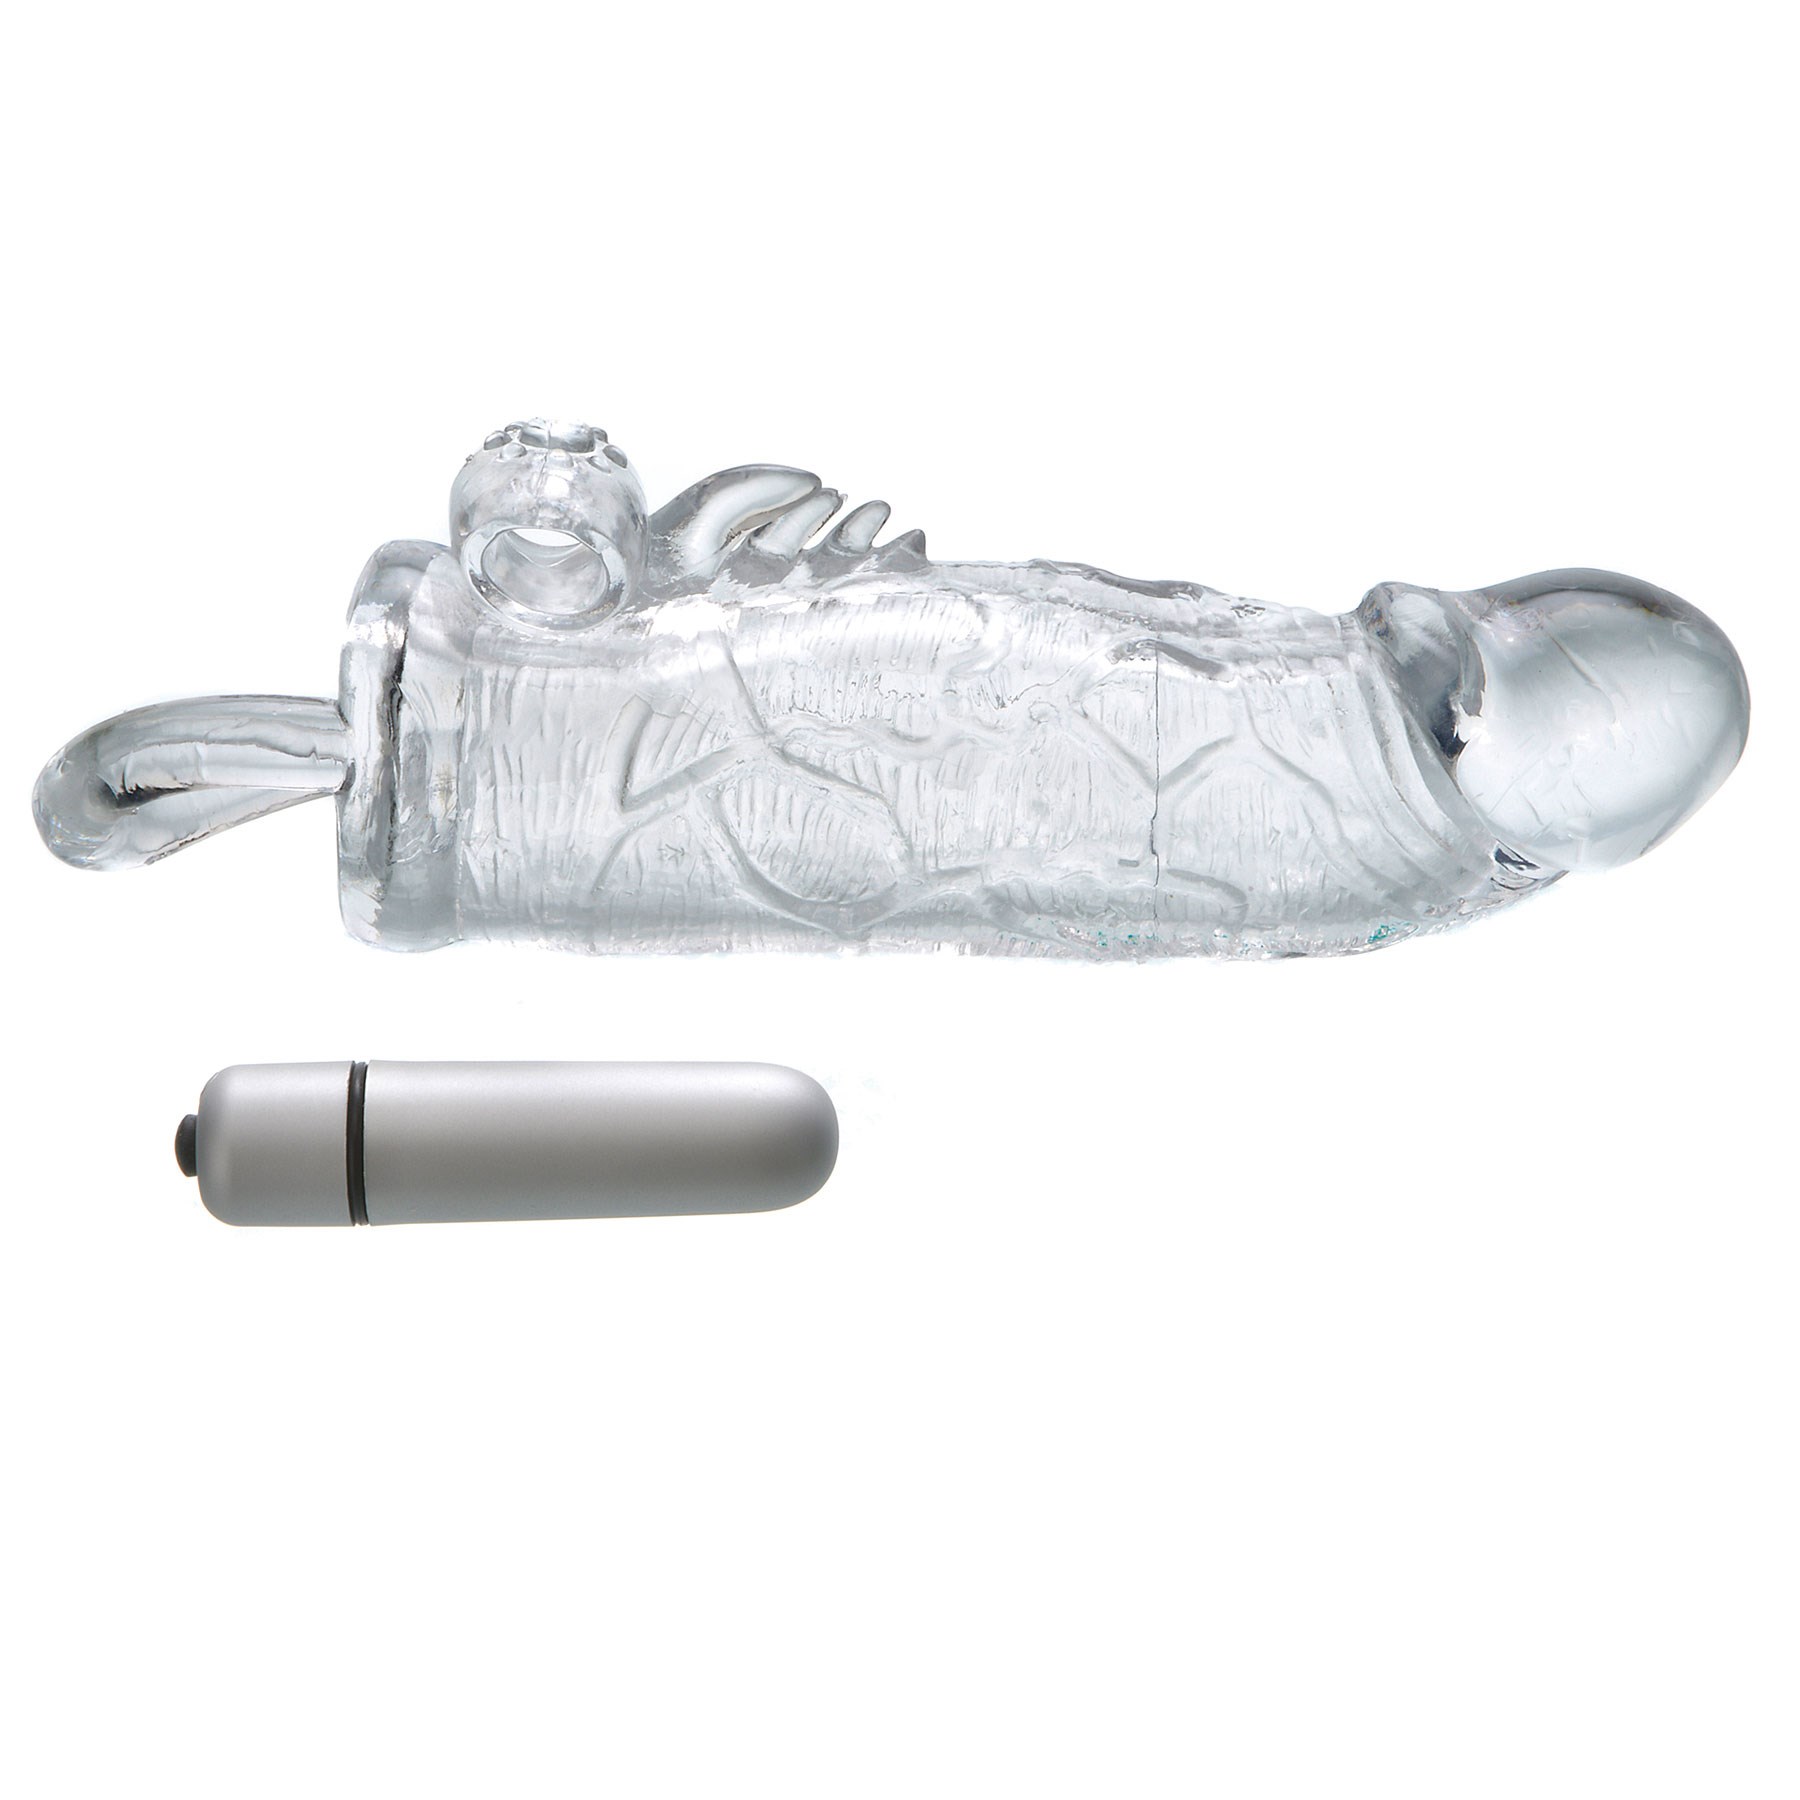 Petite Remote Control Panty Teaser clear with bullet vibe